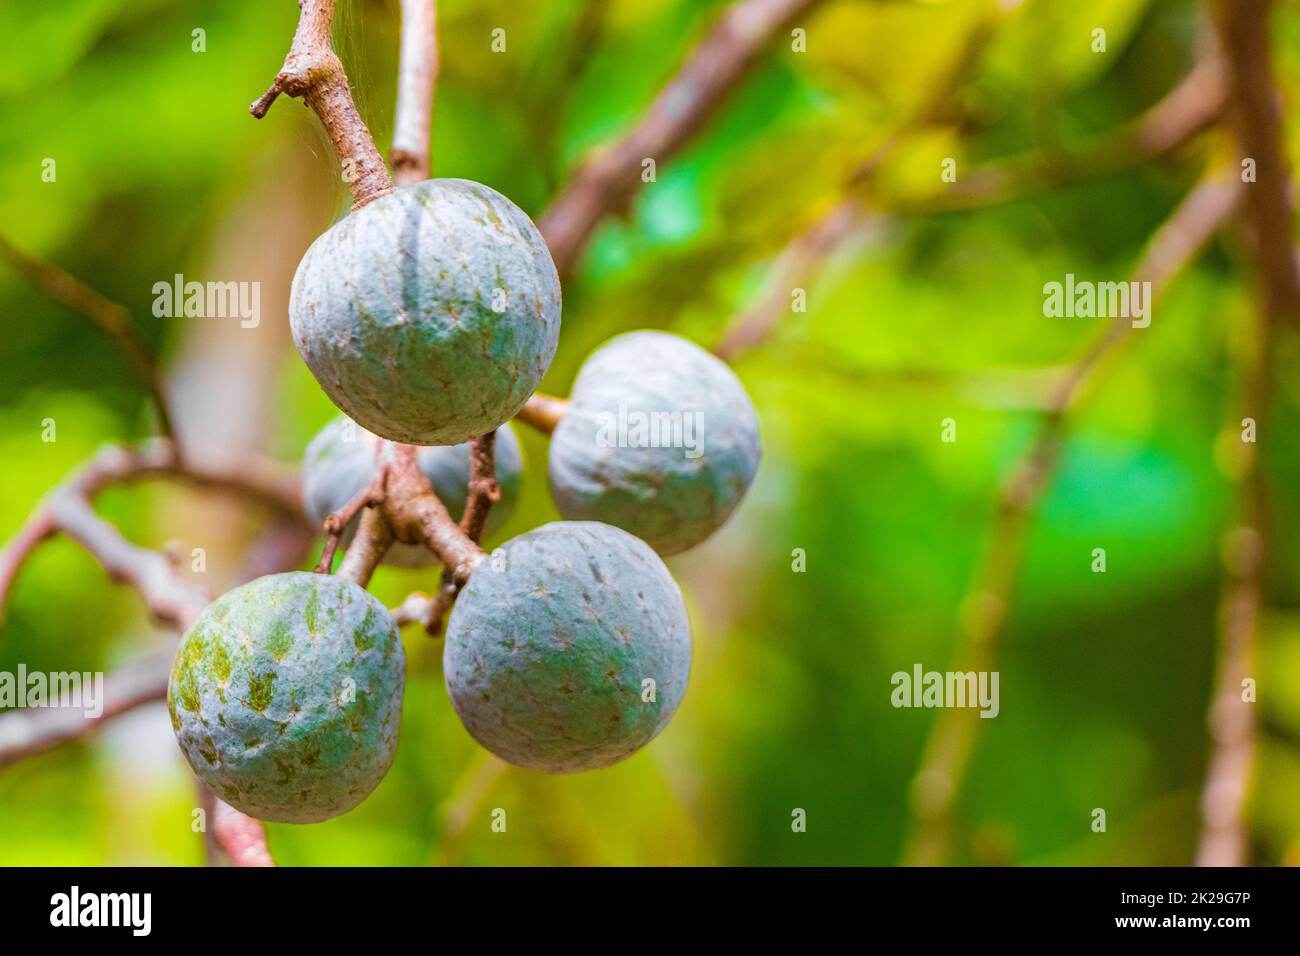 Tropical plant tree with green round fruit balls seeds Mexico Stock Photo -  Alamy